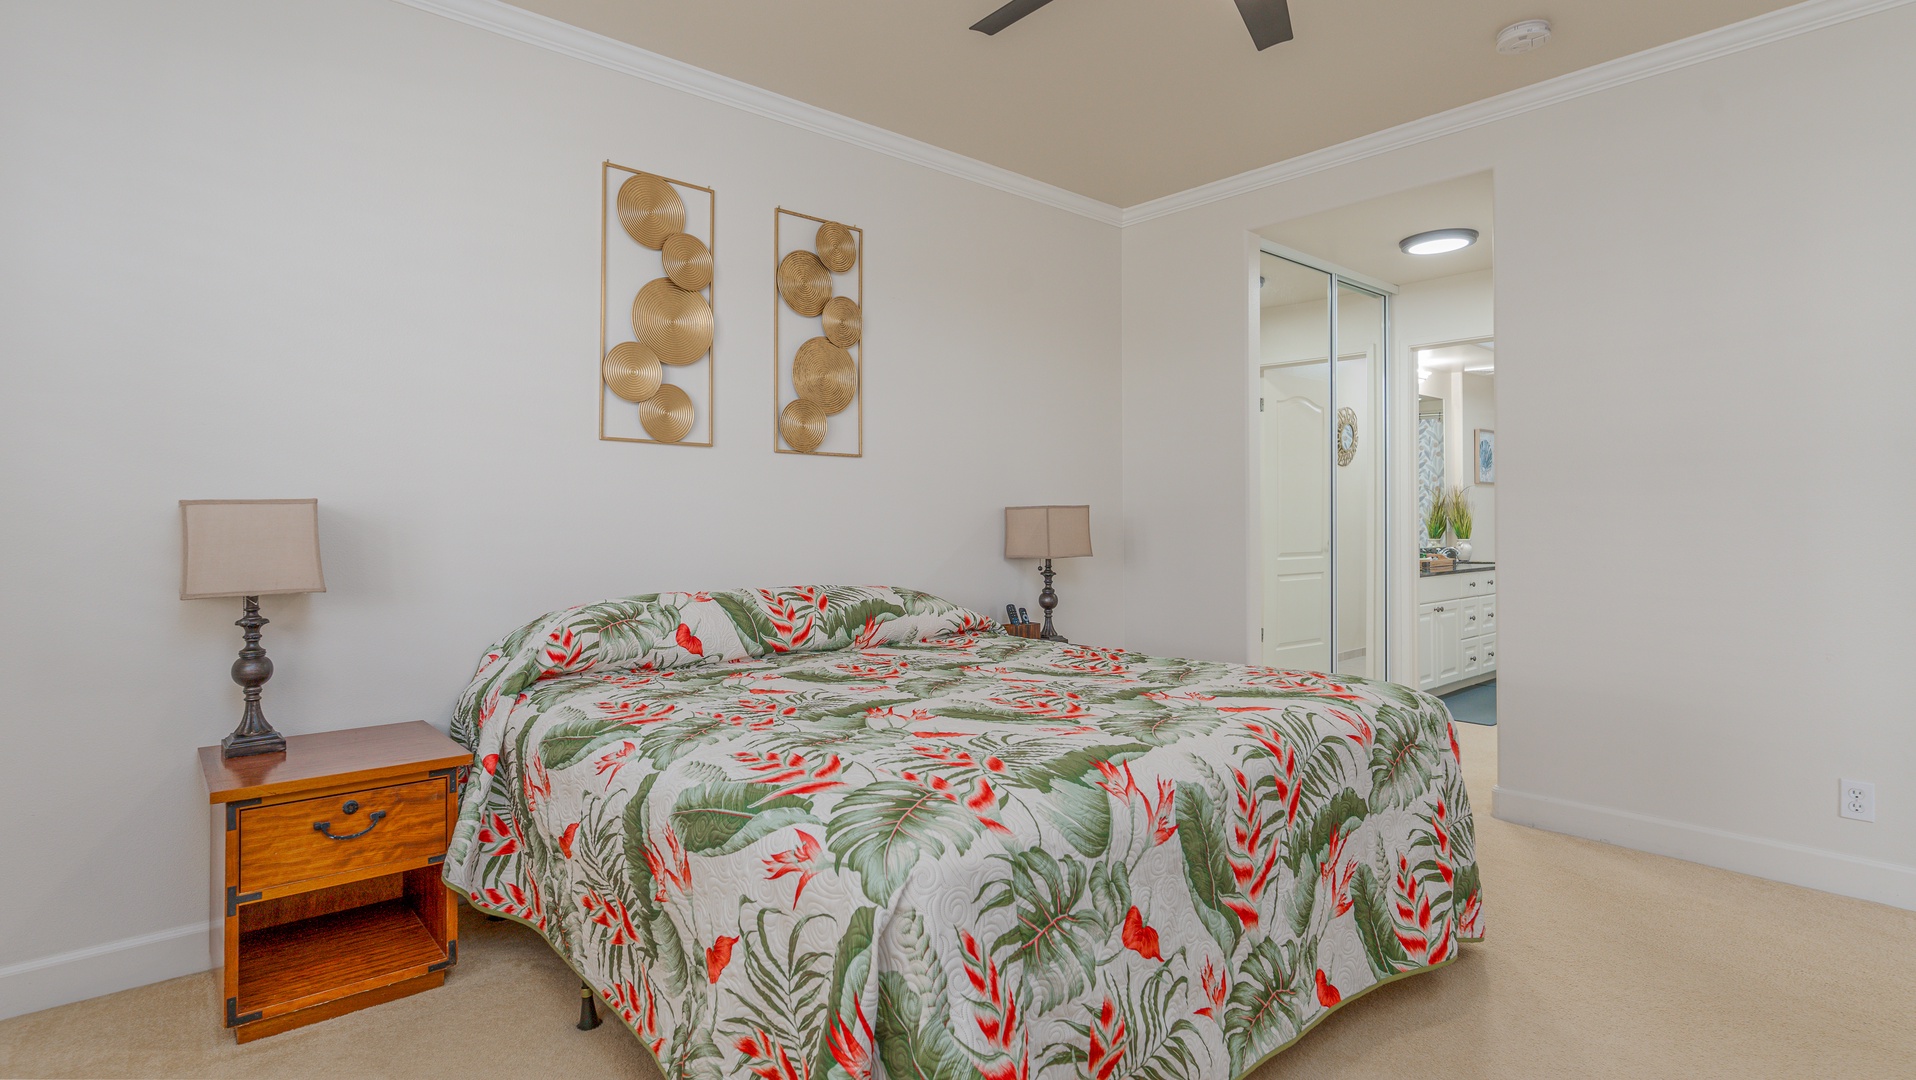 Kapolei Vacation Rentals, Ko Olina Kai 1027A - The primary guest bedroom features tropical prints and the comforts of home.